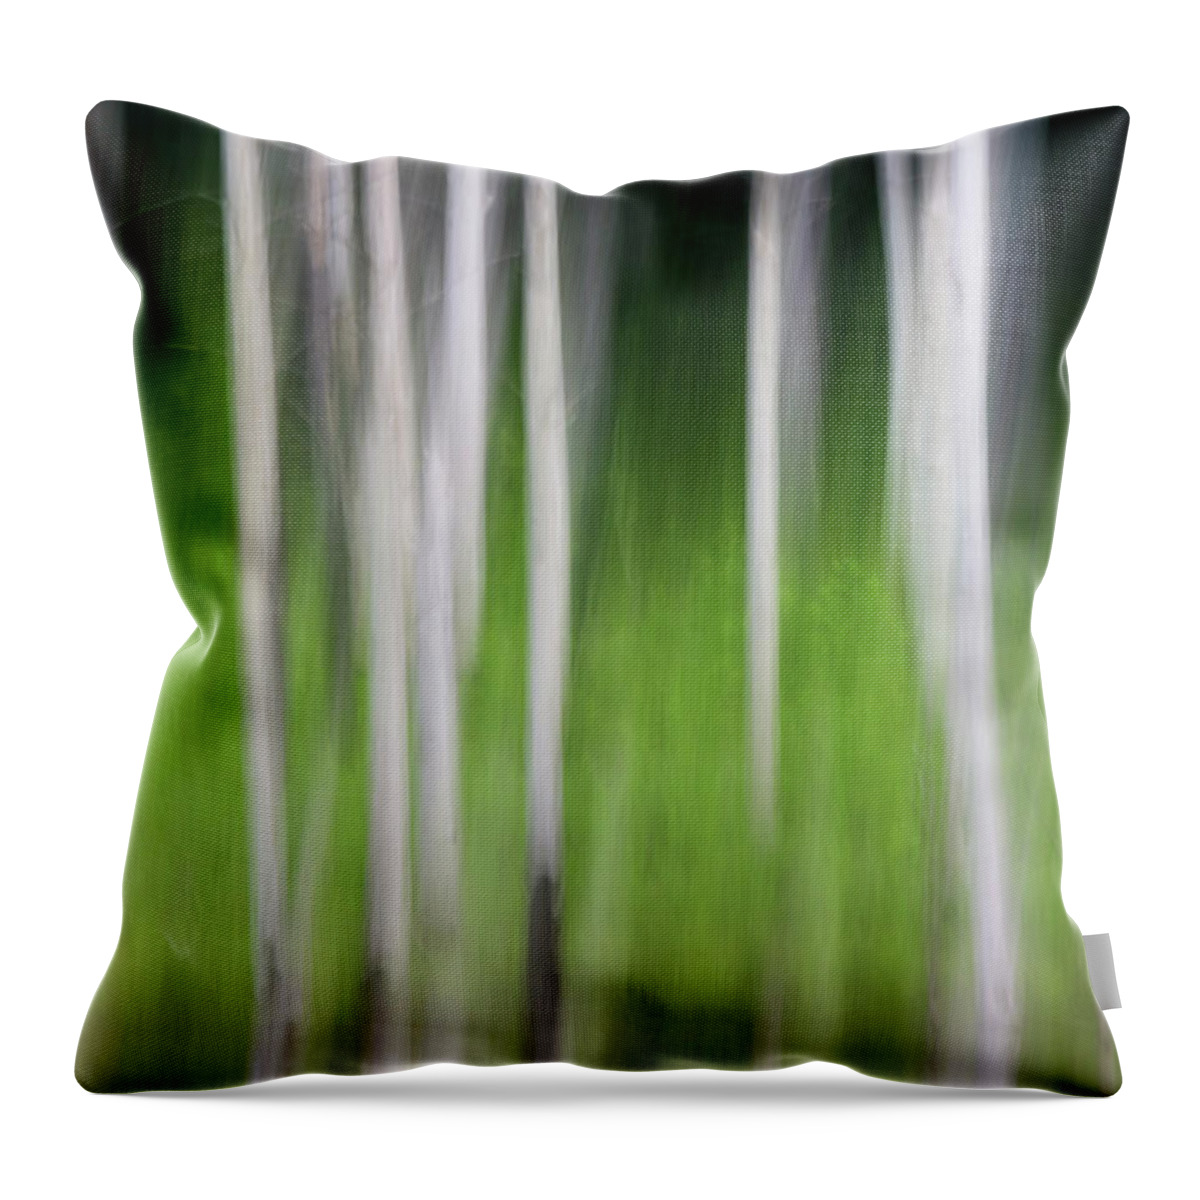 Jordan Lake Throw Pillow featuring the photograph Blurred Reflection by Melissa Southern